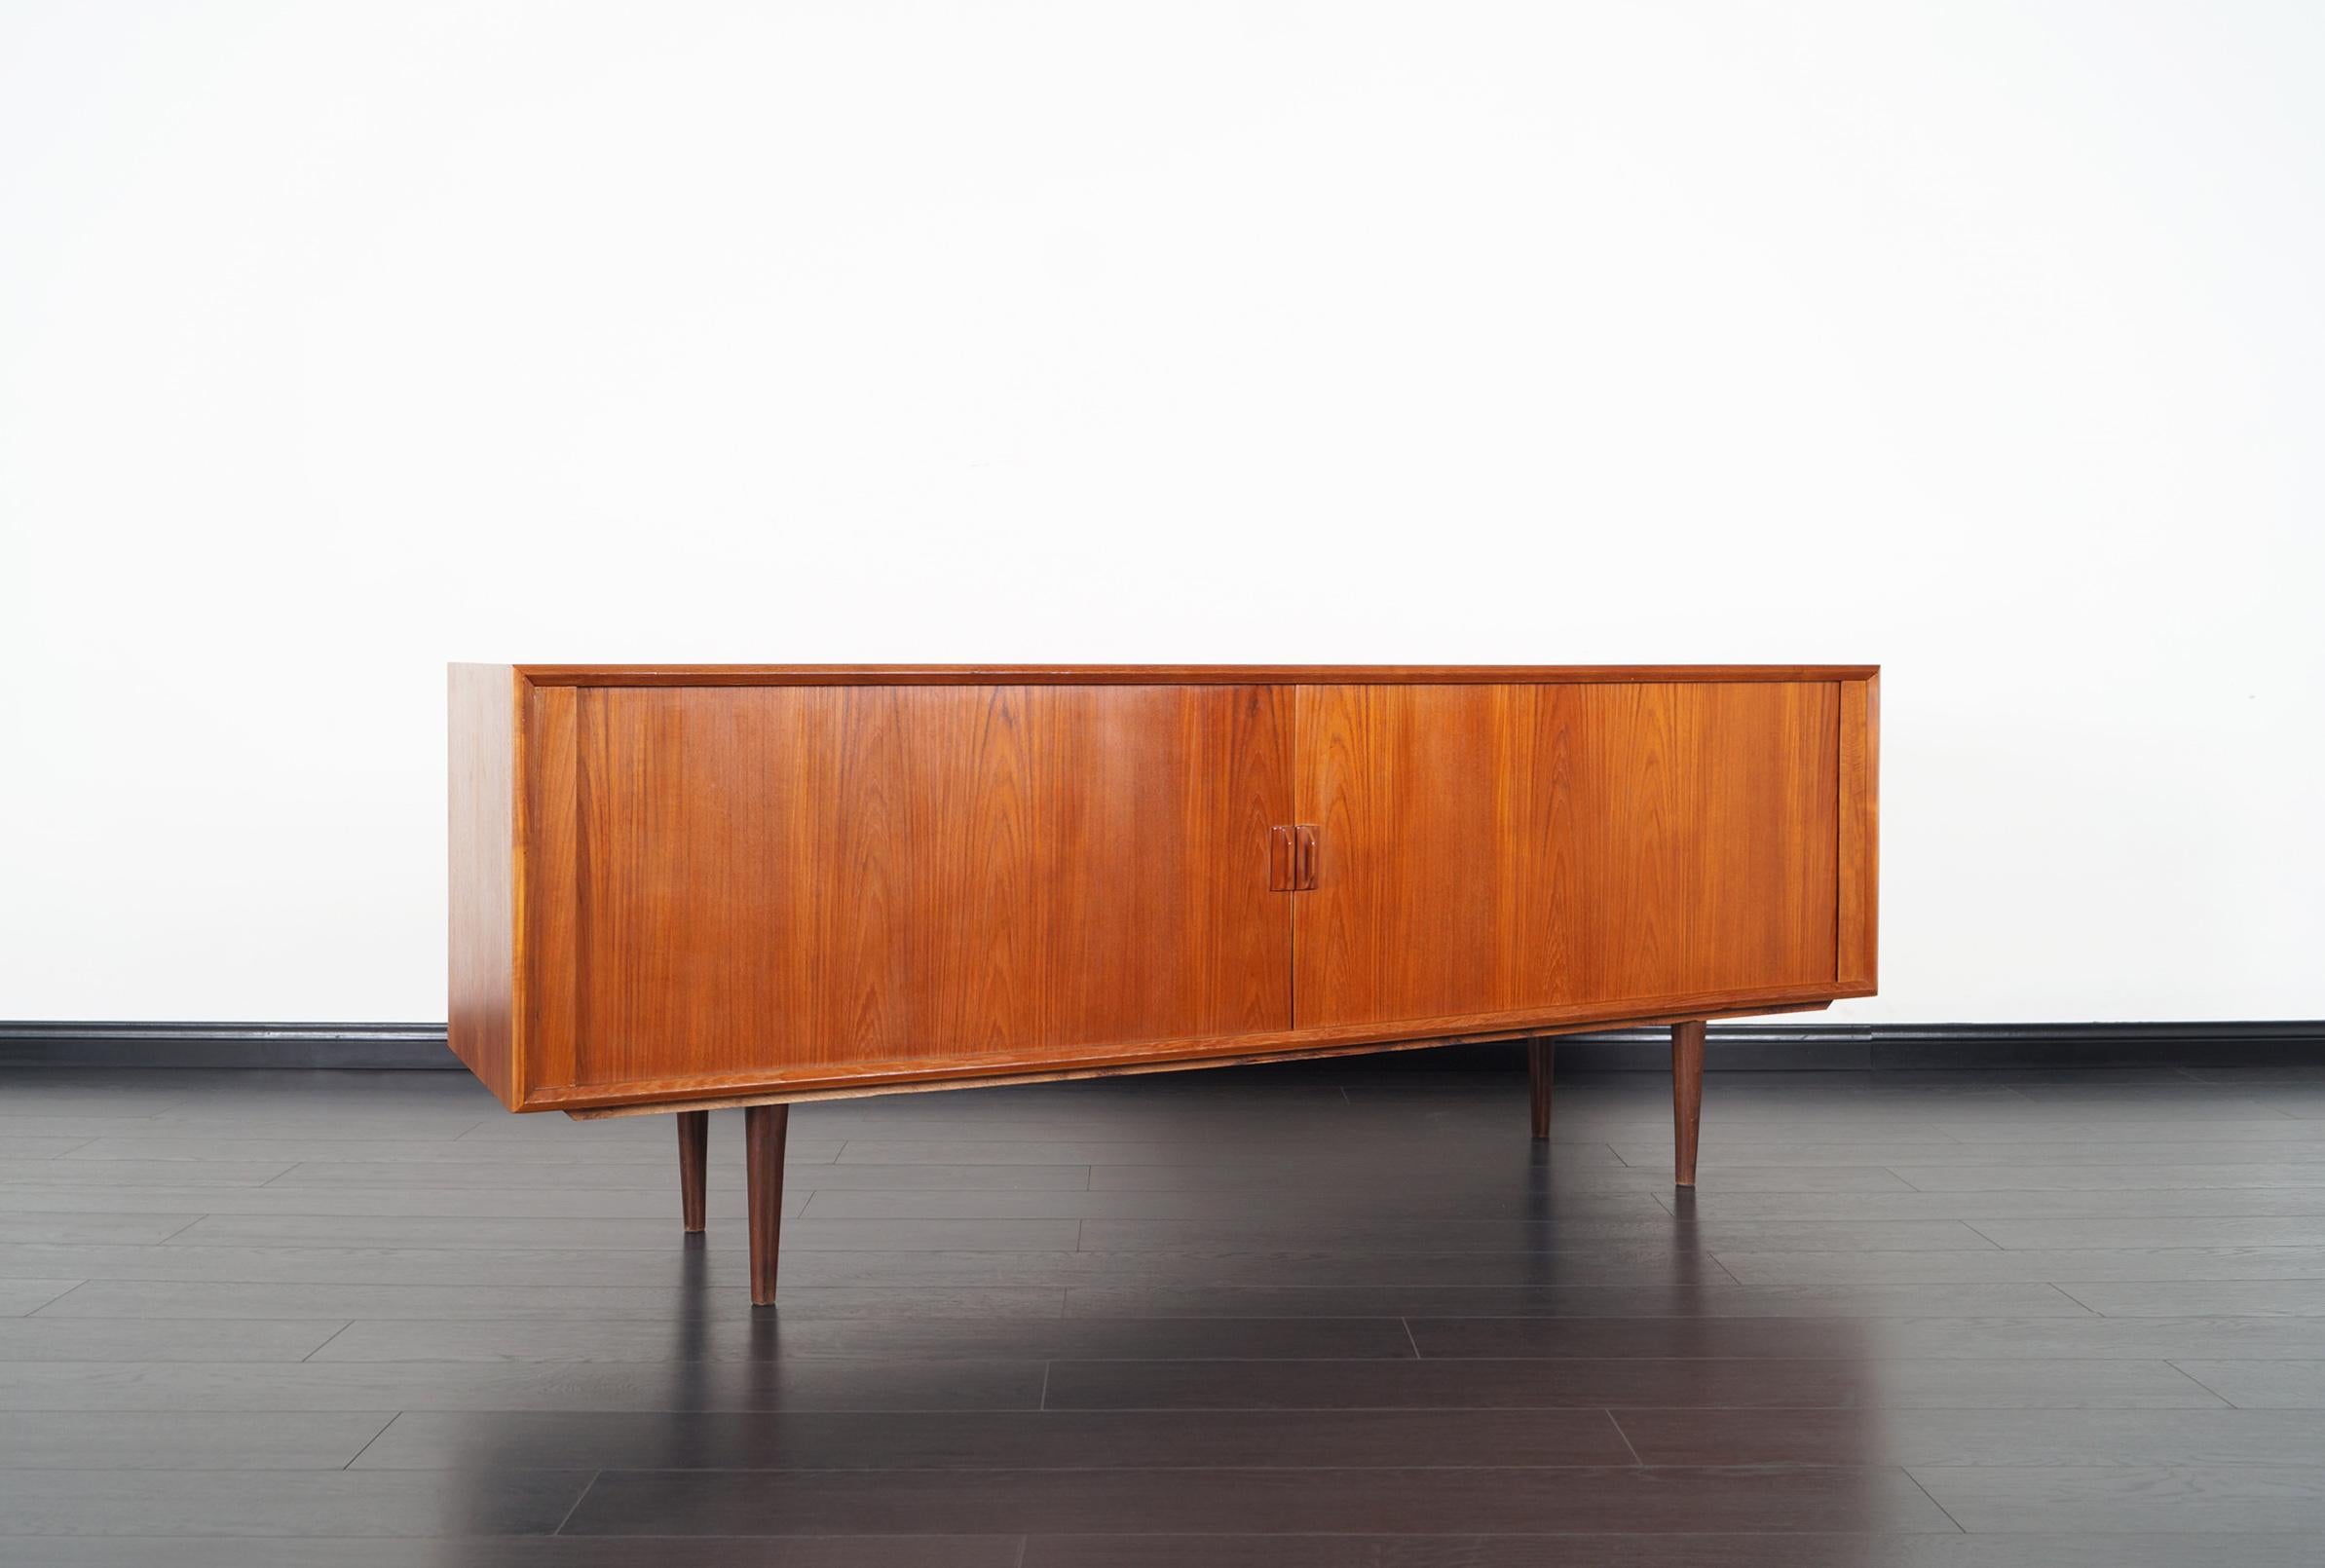 Fabulous Danish modern teak tambour door credenza designed by Svend Aage Larsen for Faarup Møbelfabrik. Features two sliding doors that reveals four dovetailed trays and a total of three adjustable shelves.